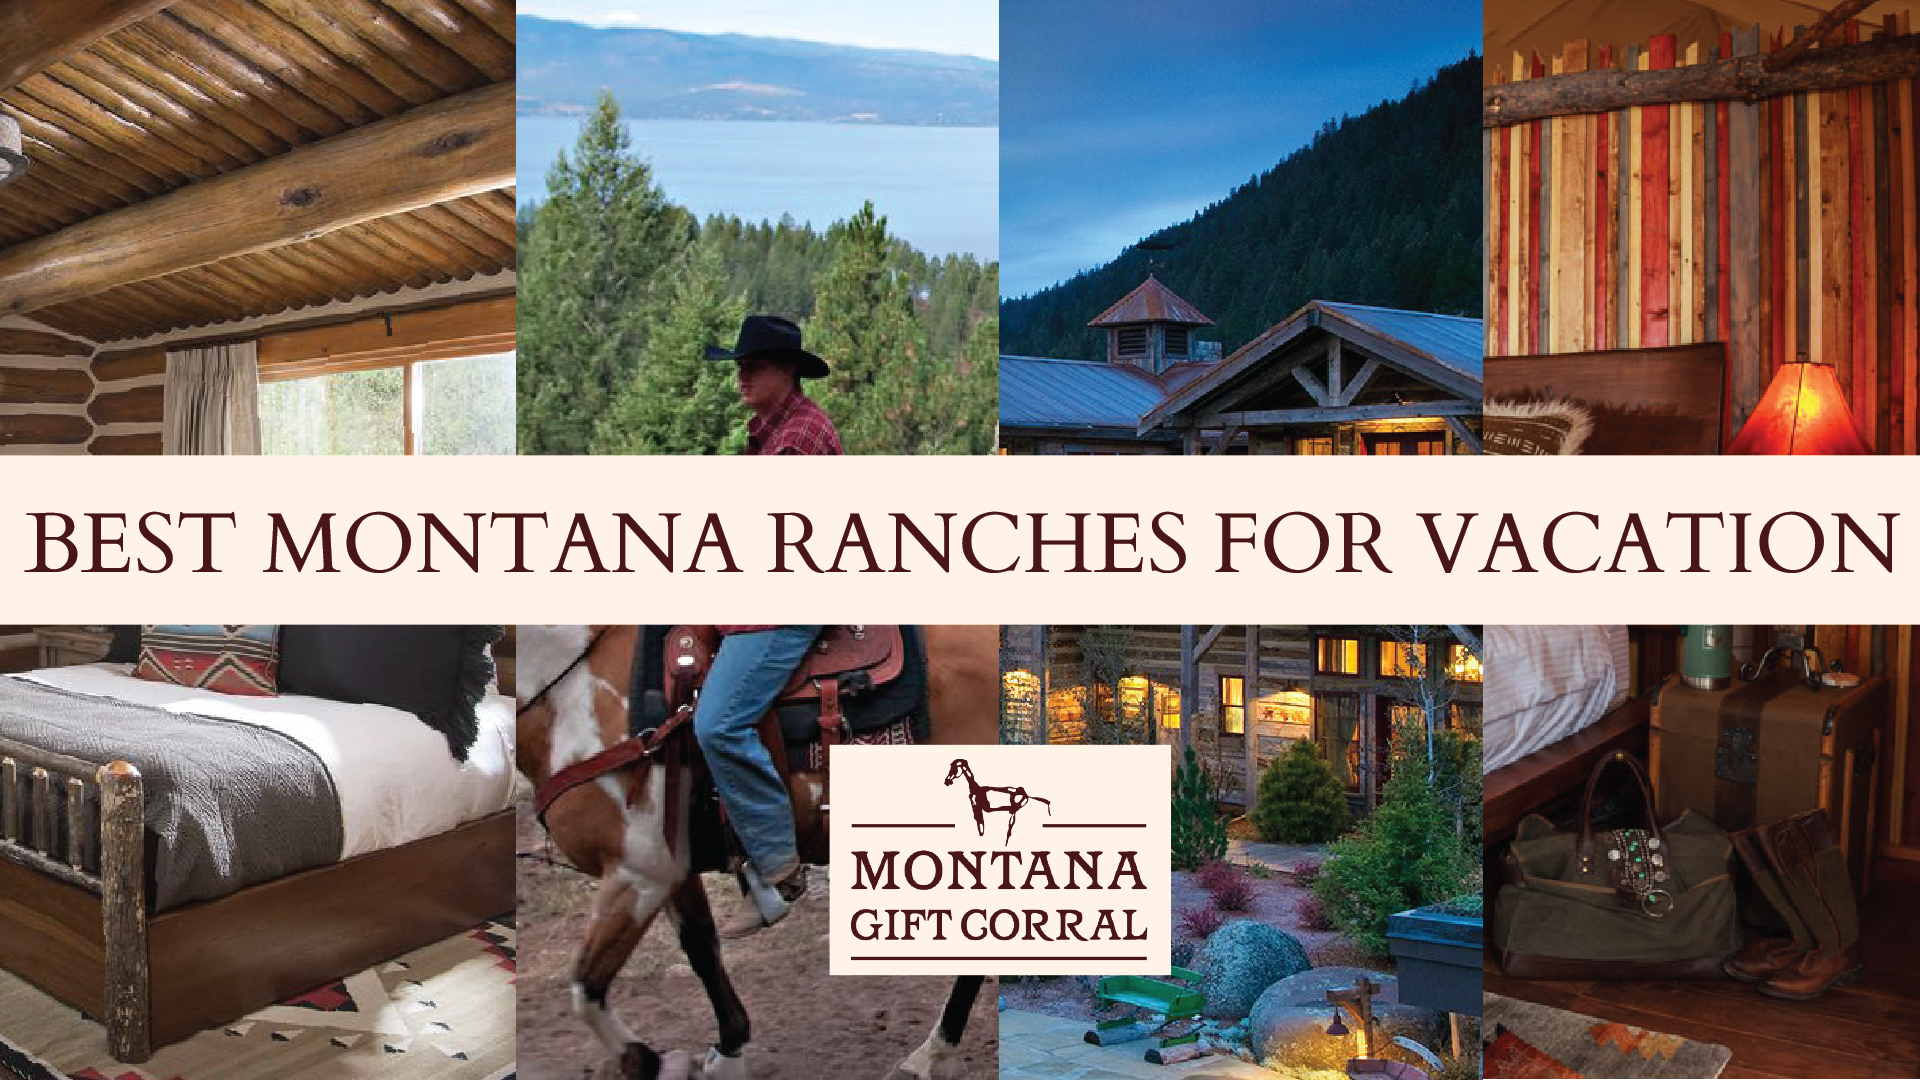 Montana's Best Ranches for a Vacation